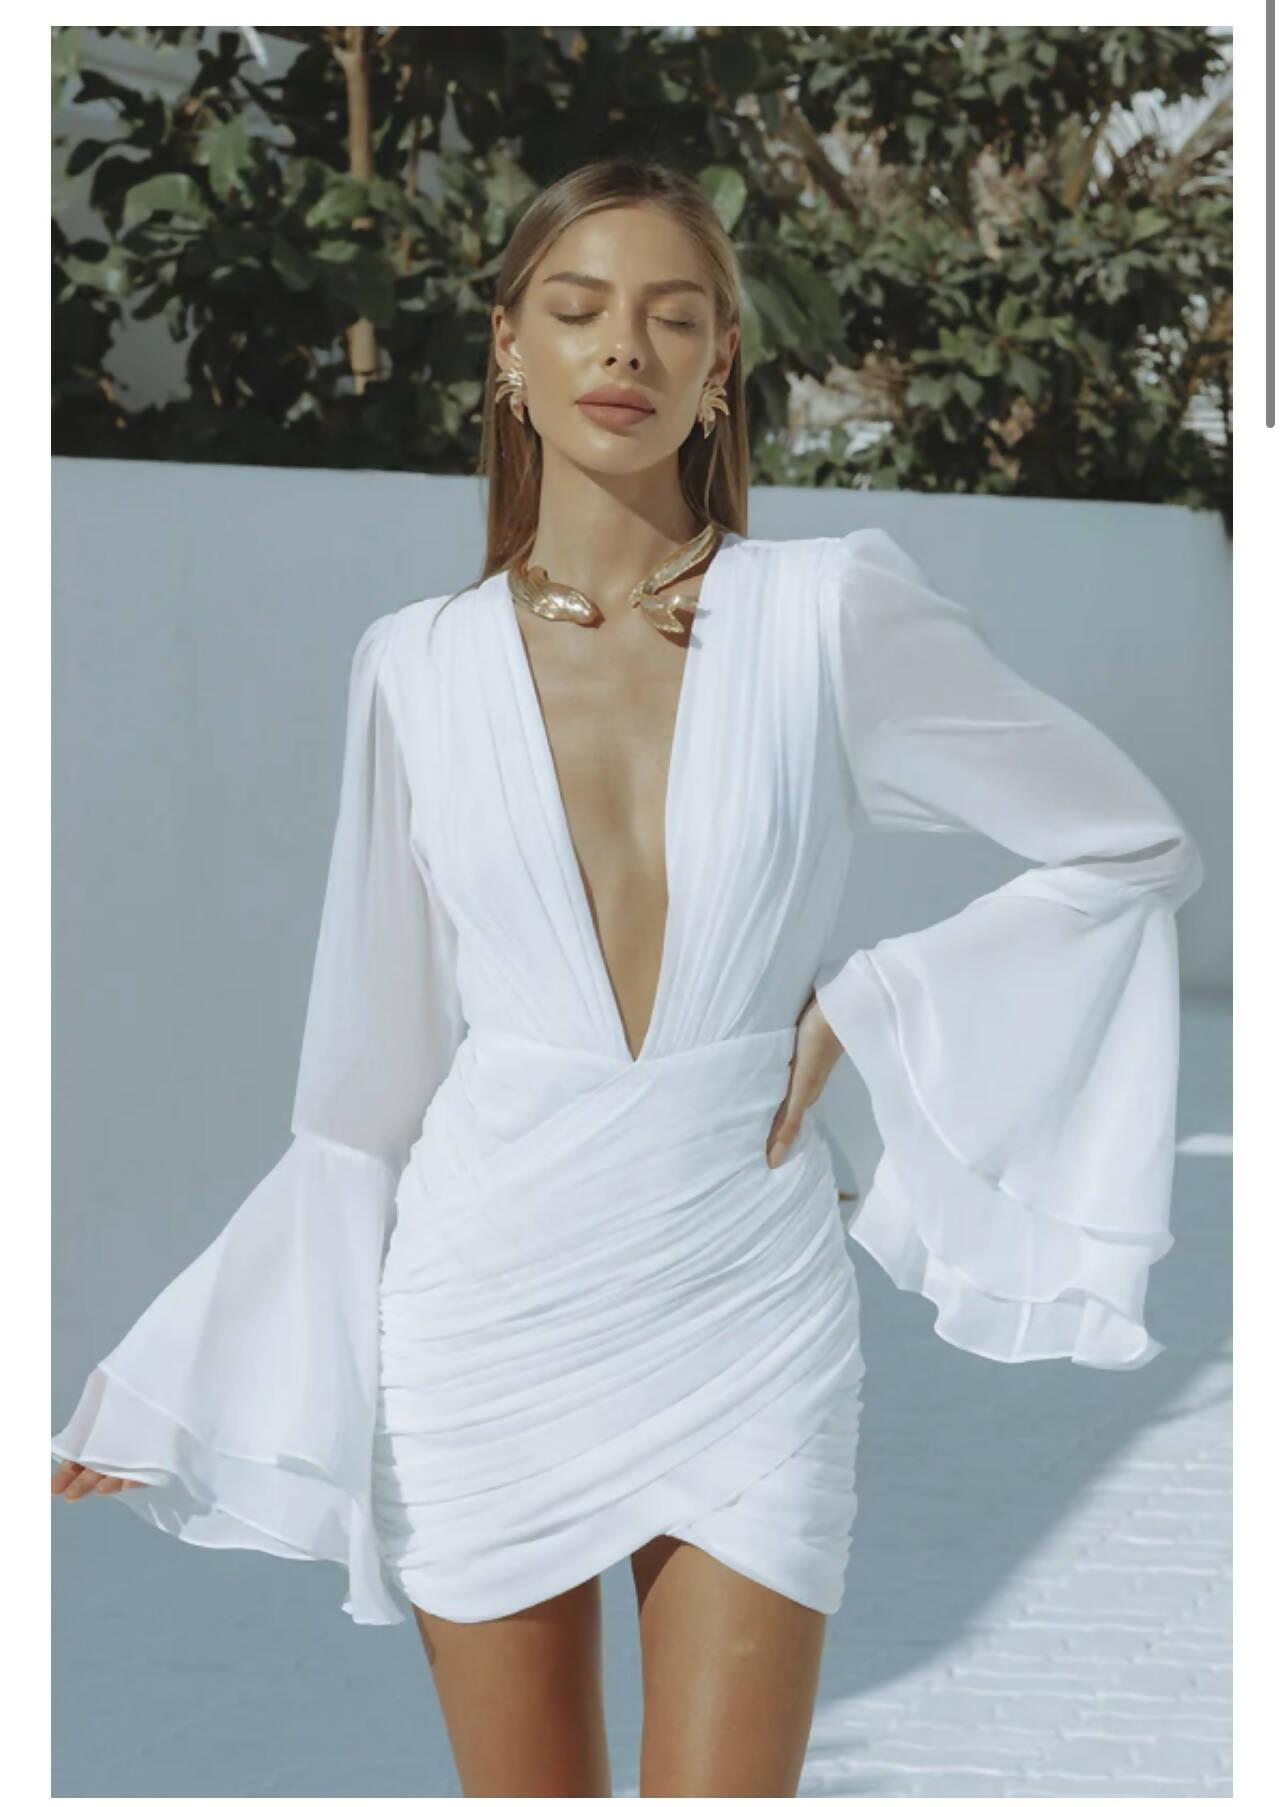 White Ruched Mini Dress Long Sleeve Tiered Arms - Endless